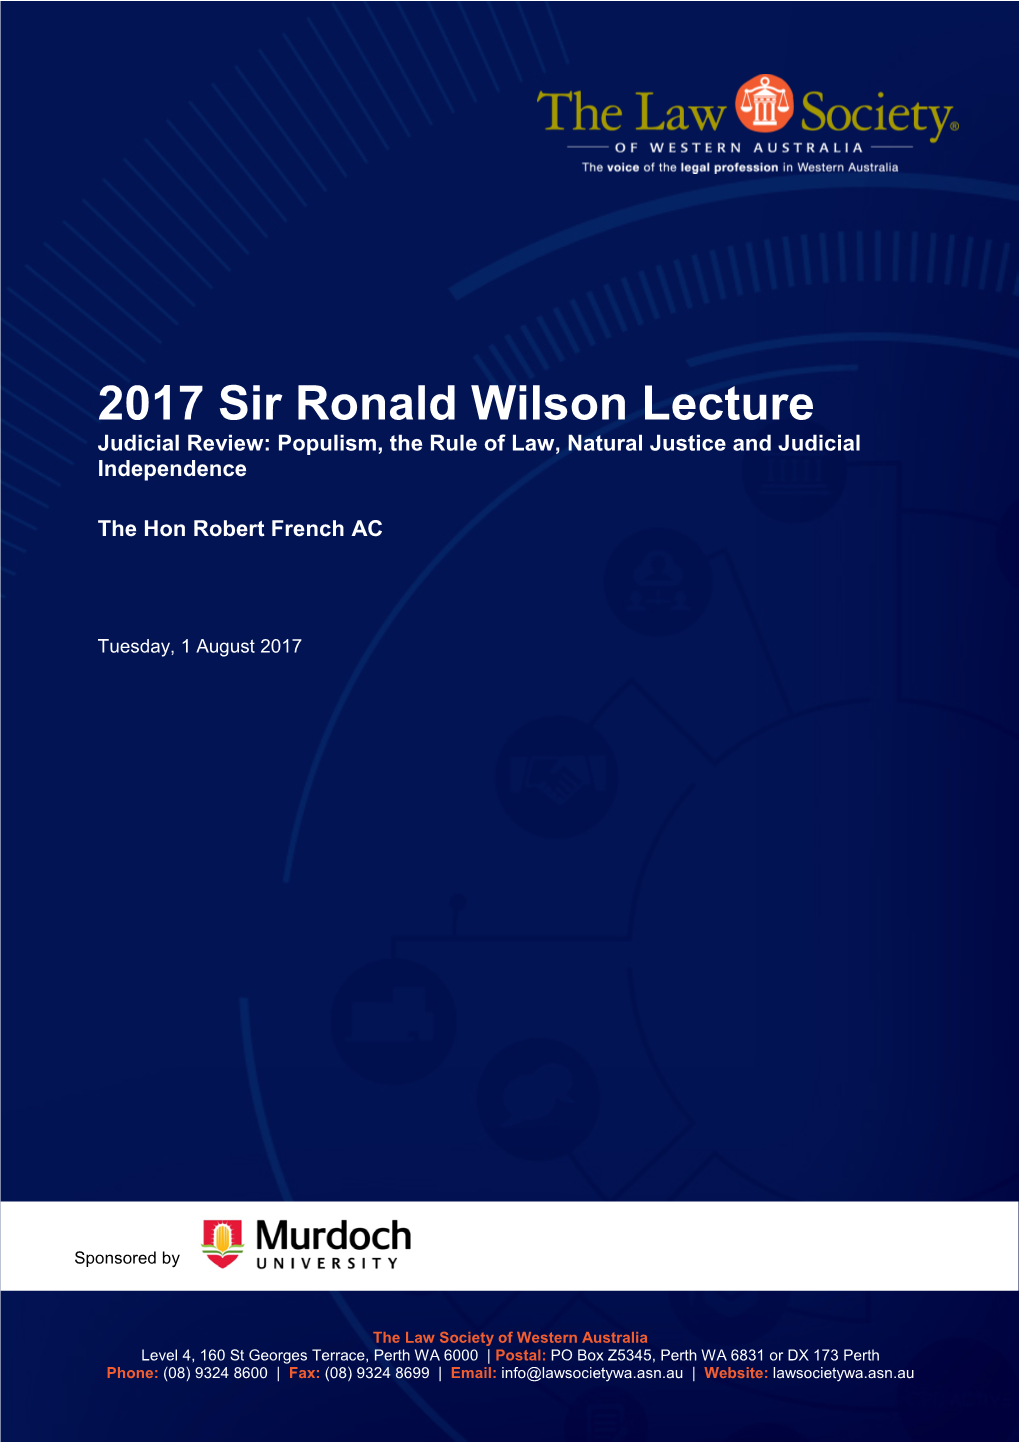 2017 Sir Ronald Wilson Lecture Judicial Review: Populism, the Rule of Law, Natural Justice and Judicial Independence